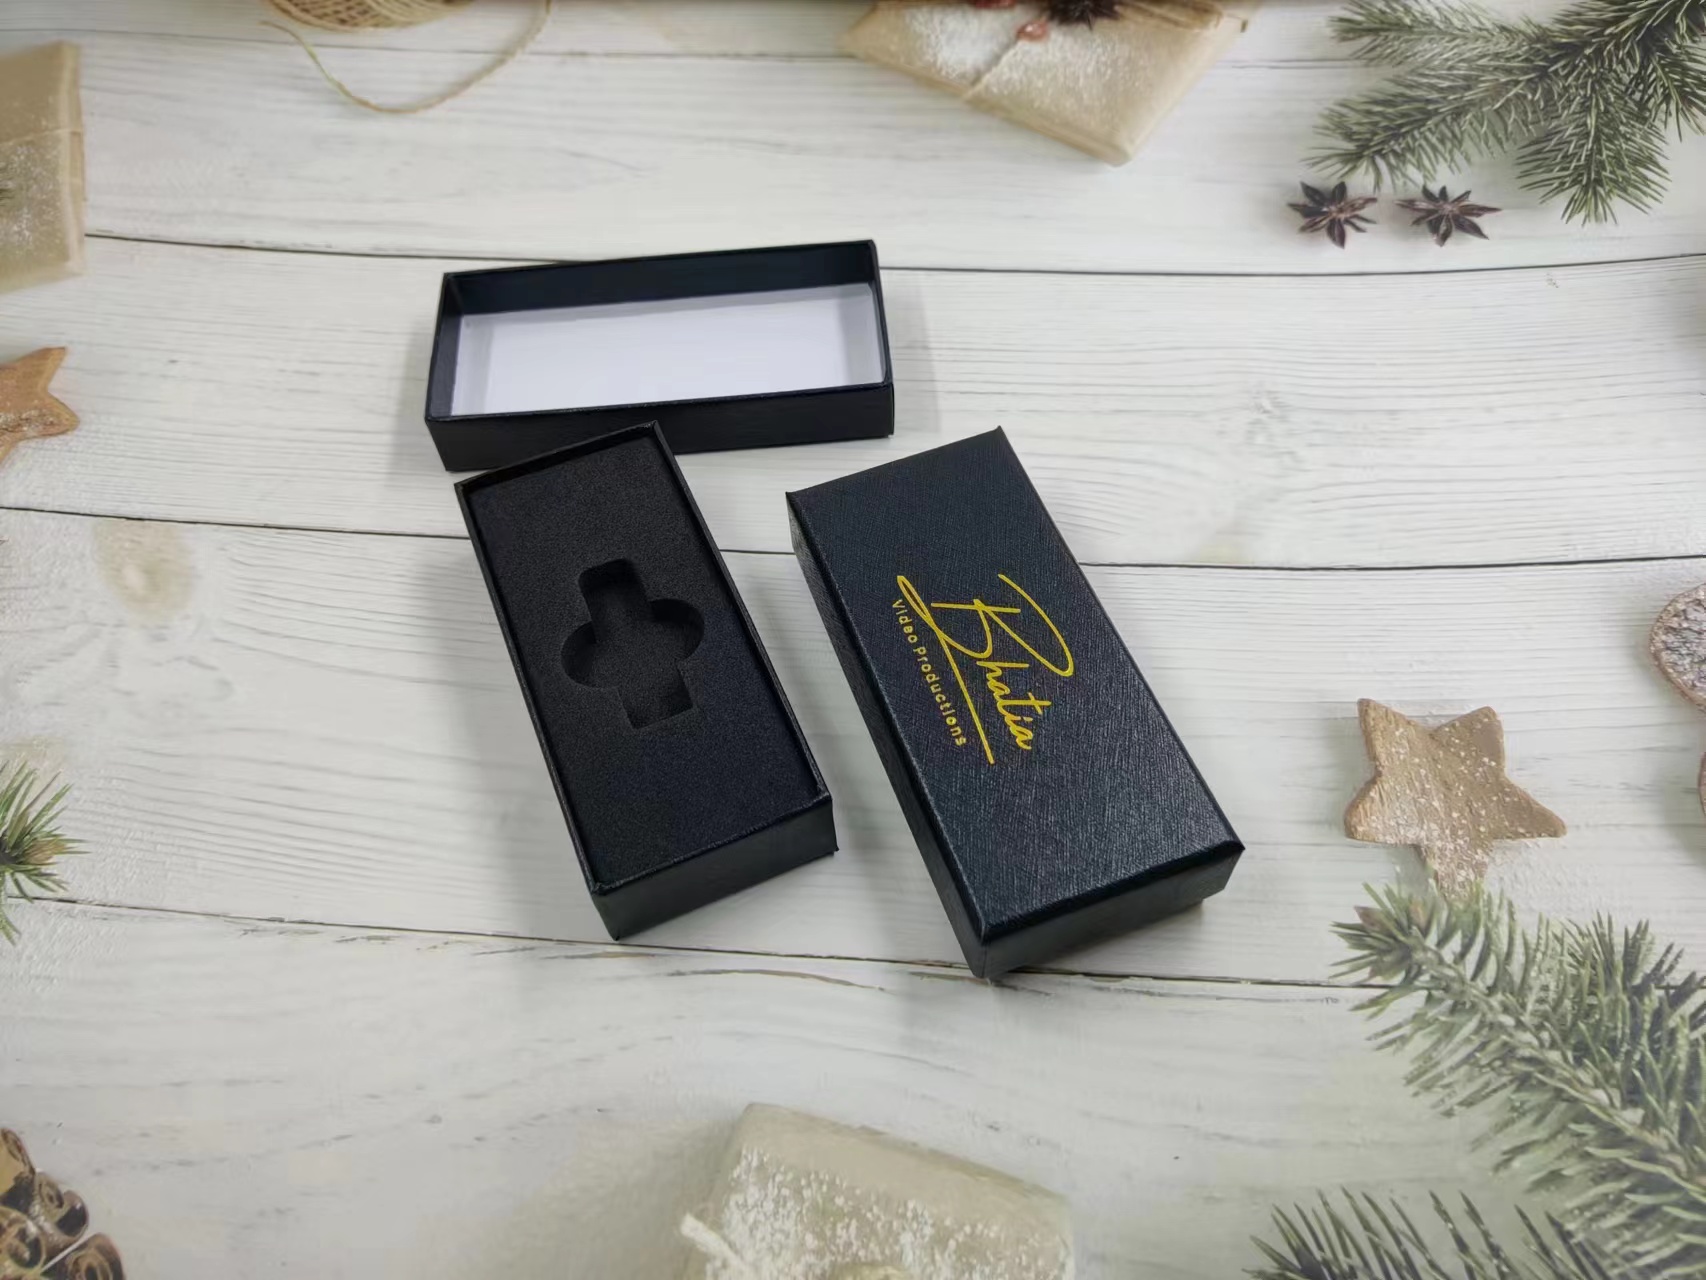 Custom Gift boxes also available if you do not need our USB sticks right now